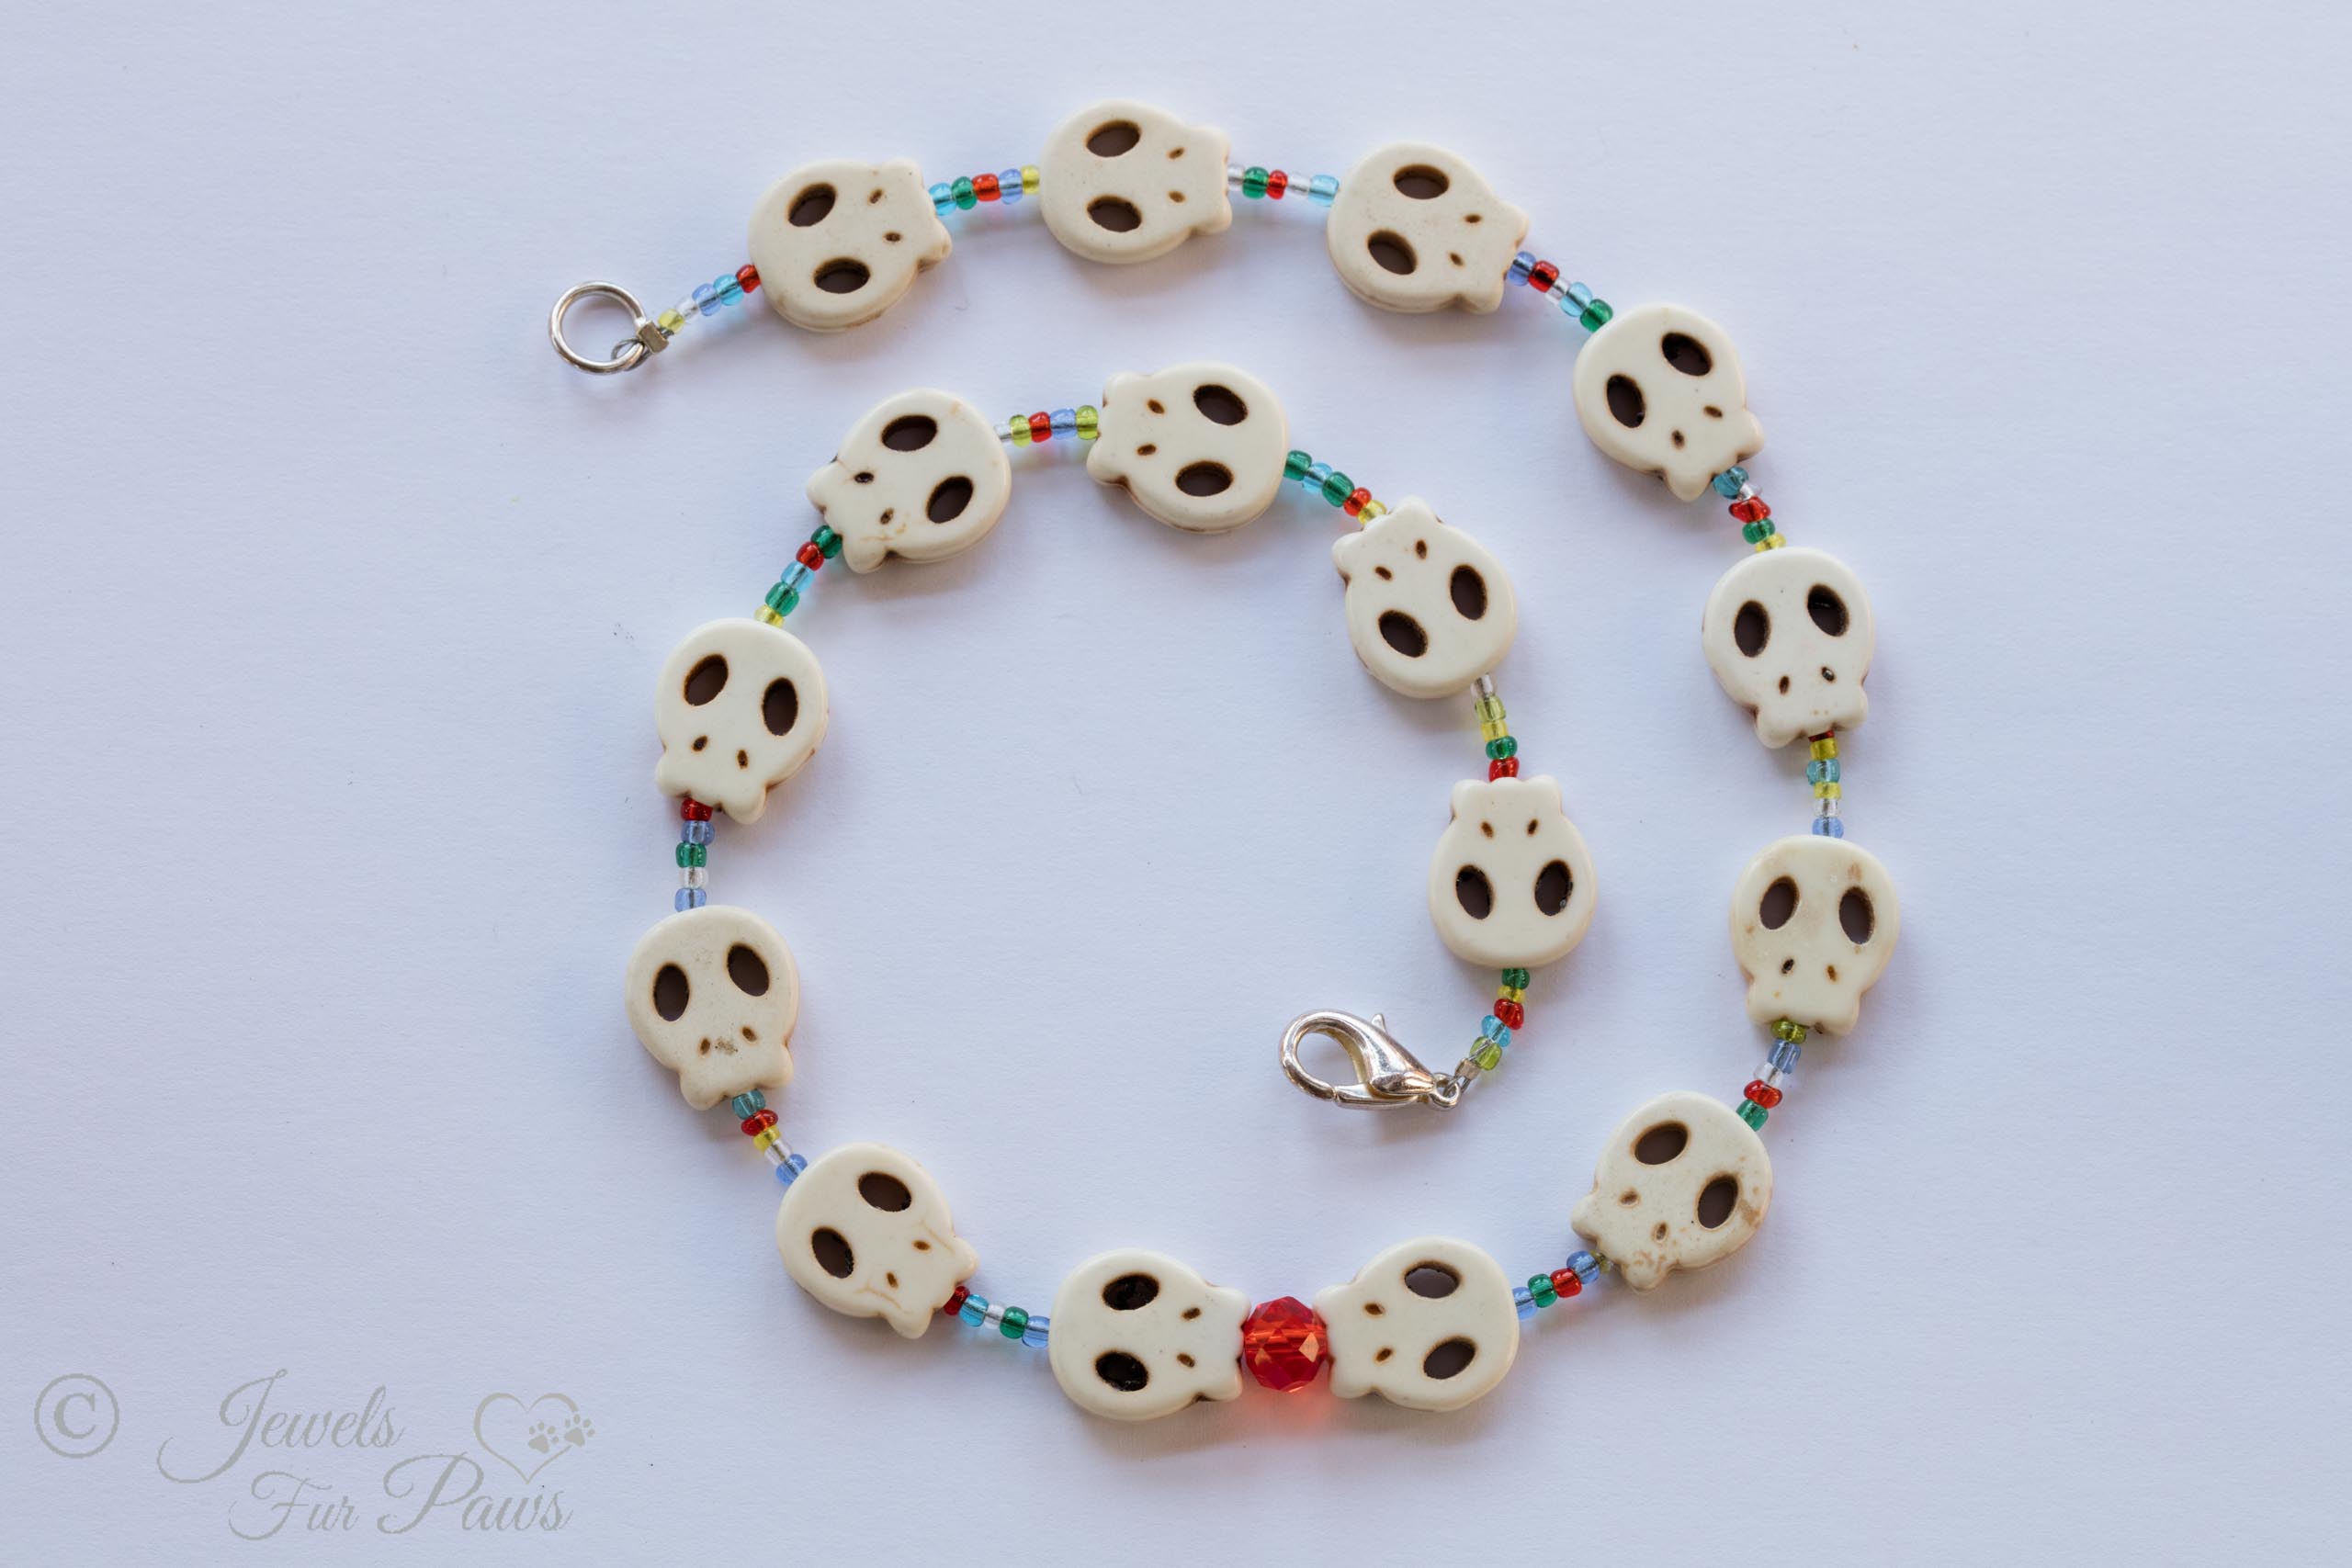 pet dog cat jewelry necklaces white skull charms strung with small blue, green, amber, orange spacer beads and feature a larger faceted red czech crystal on a white background